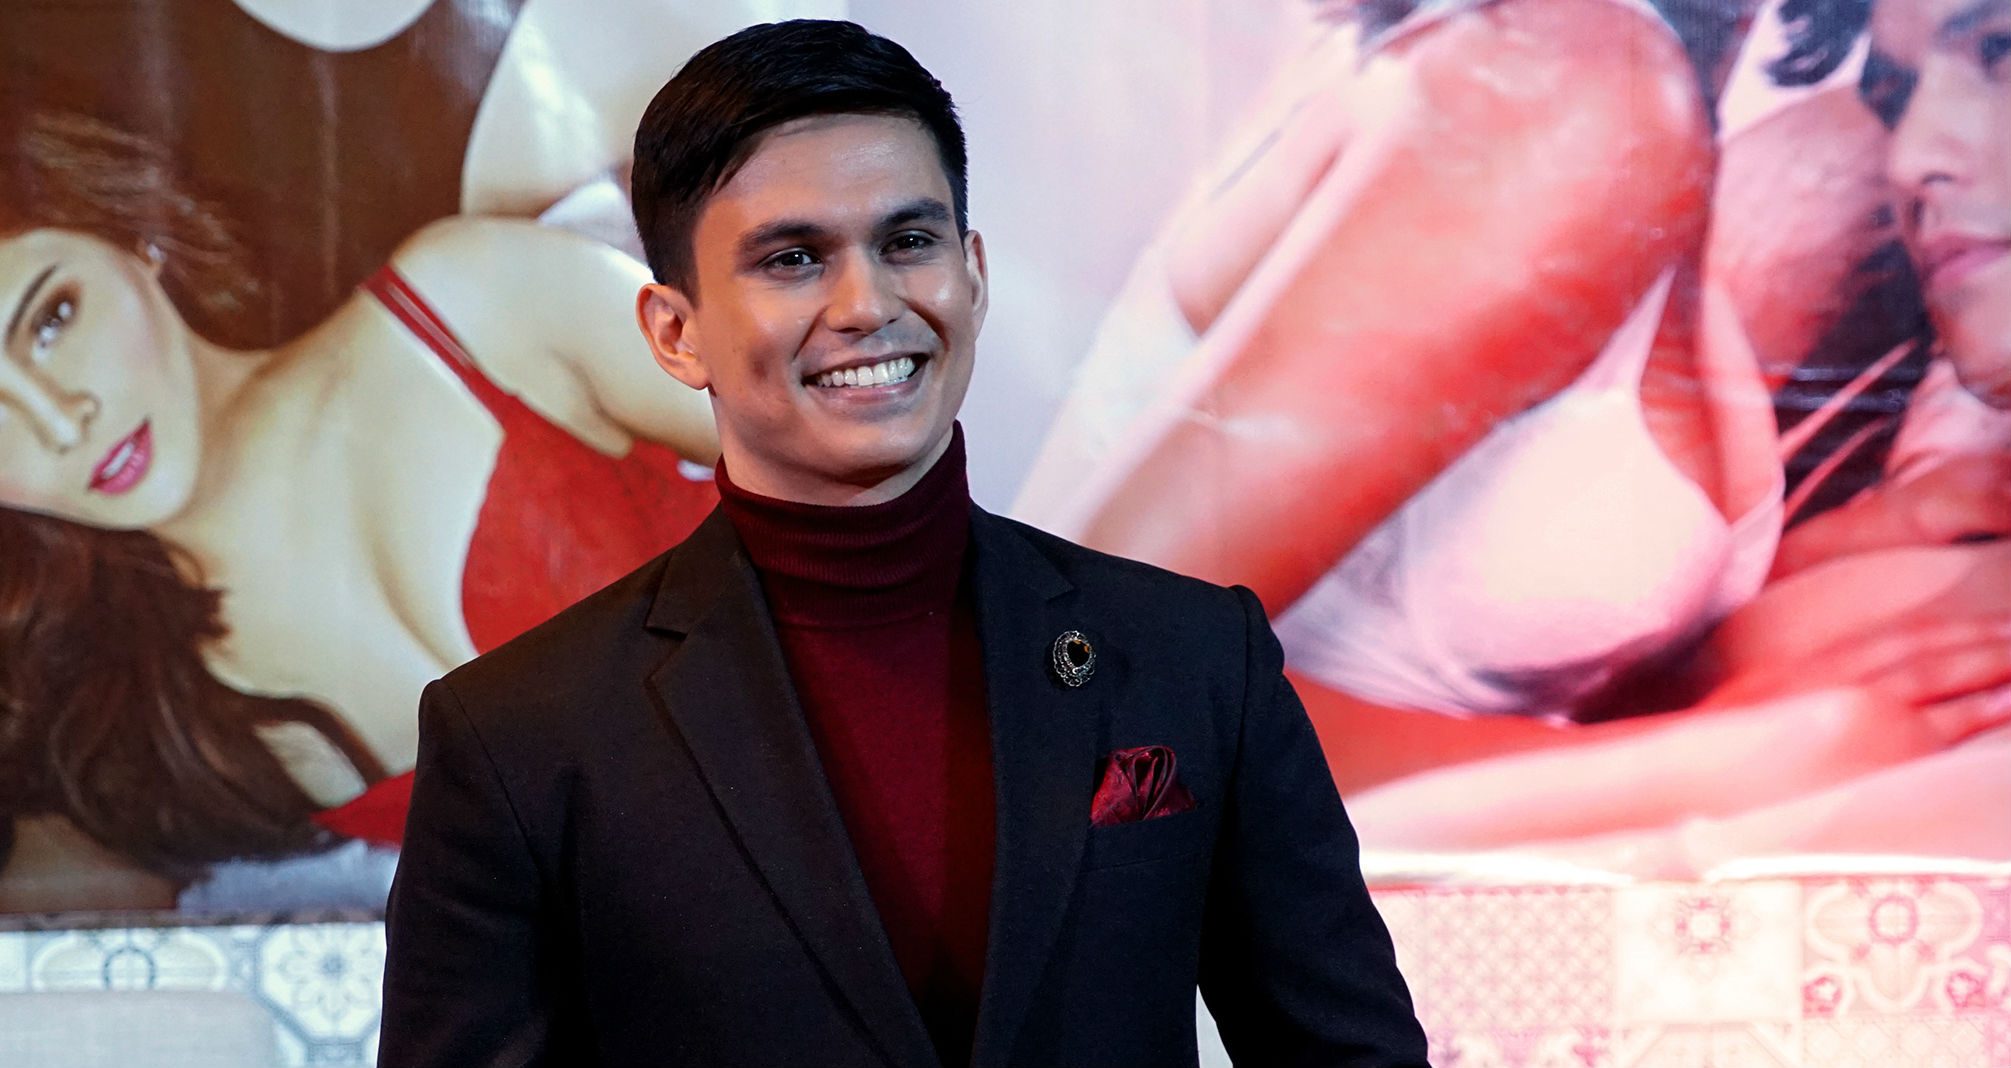 ‘Significant Other’ star Tom Rodriguez shares his views on infidelity